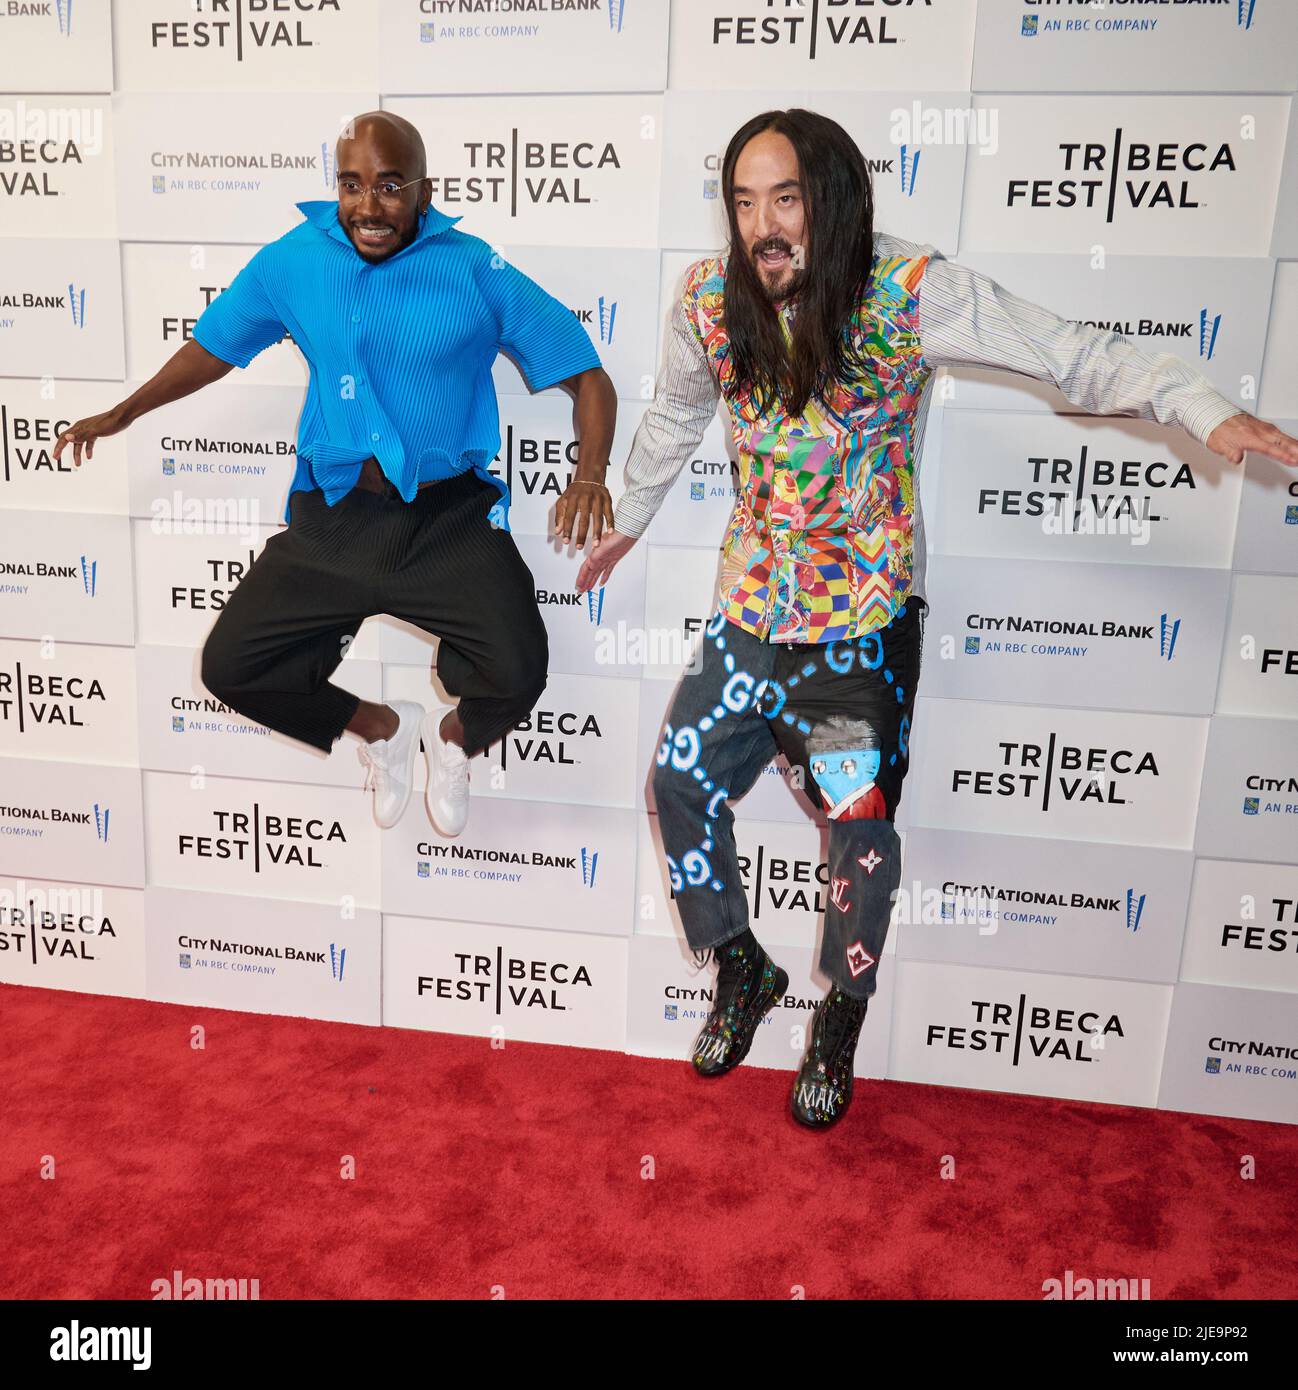 NEW YORK, NY, USA - JUNE 13, 2022: Jacques Morel and Steve Aoki attend the Tribeca Festival 'Storytellers - Steve Aoki with Jacques Morel'. Stock Photo